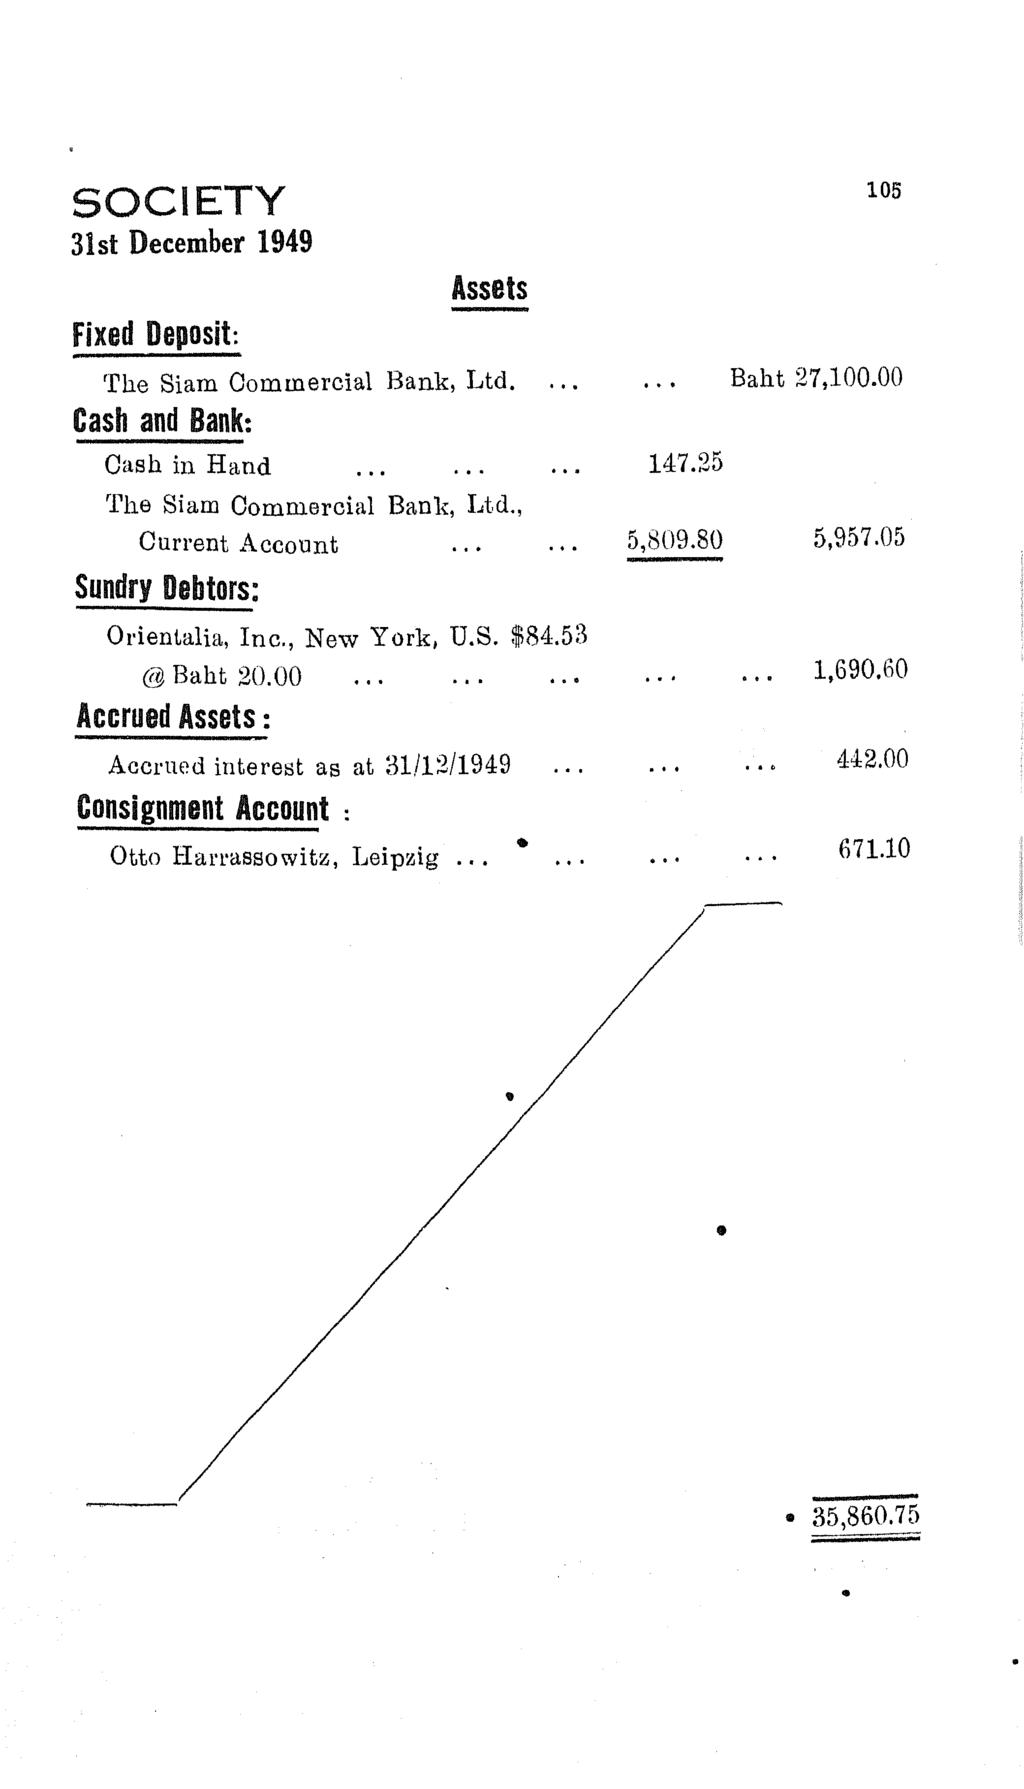 SOCIETY 31st December 1949 Fixed Deposit: Assets rrlle Siam Commercial Bank, Ltd. Cash and Bank: Cash in Hand rrhe Siam Commercial Bank, Ltd., Current Account Sundry Debtors: Orienialia, Inc.